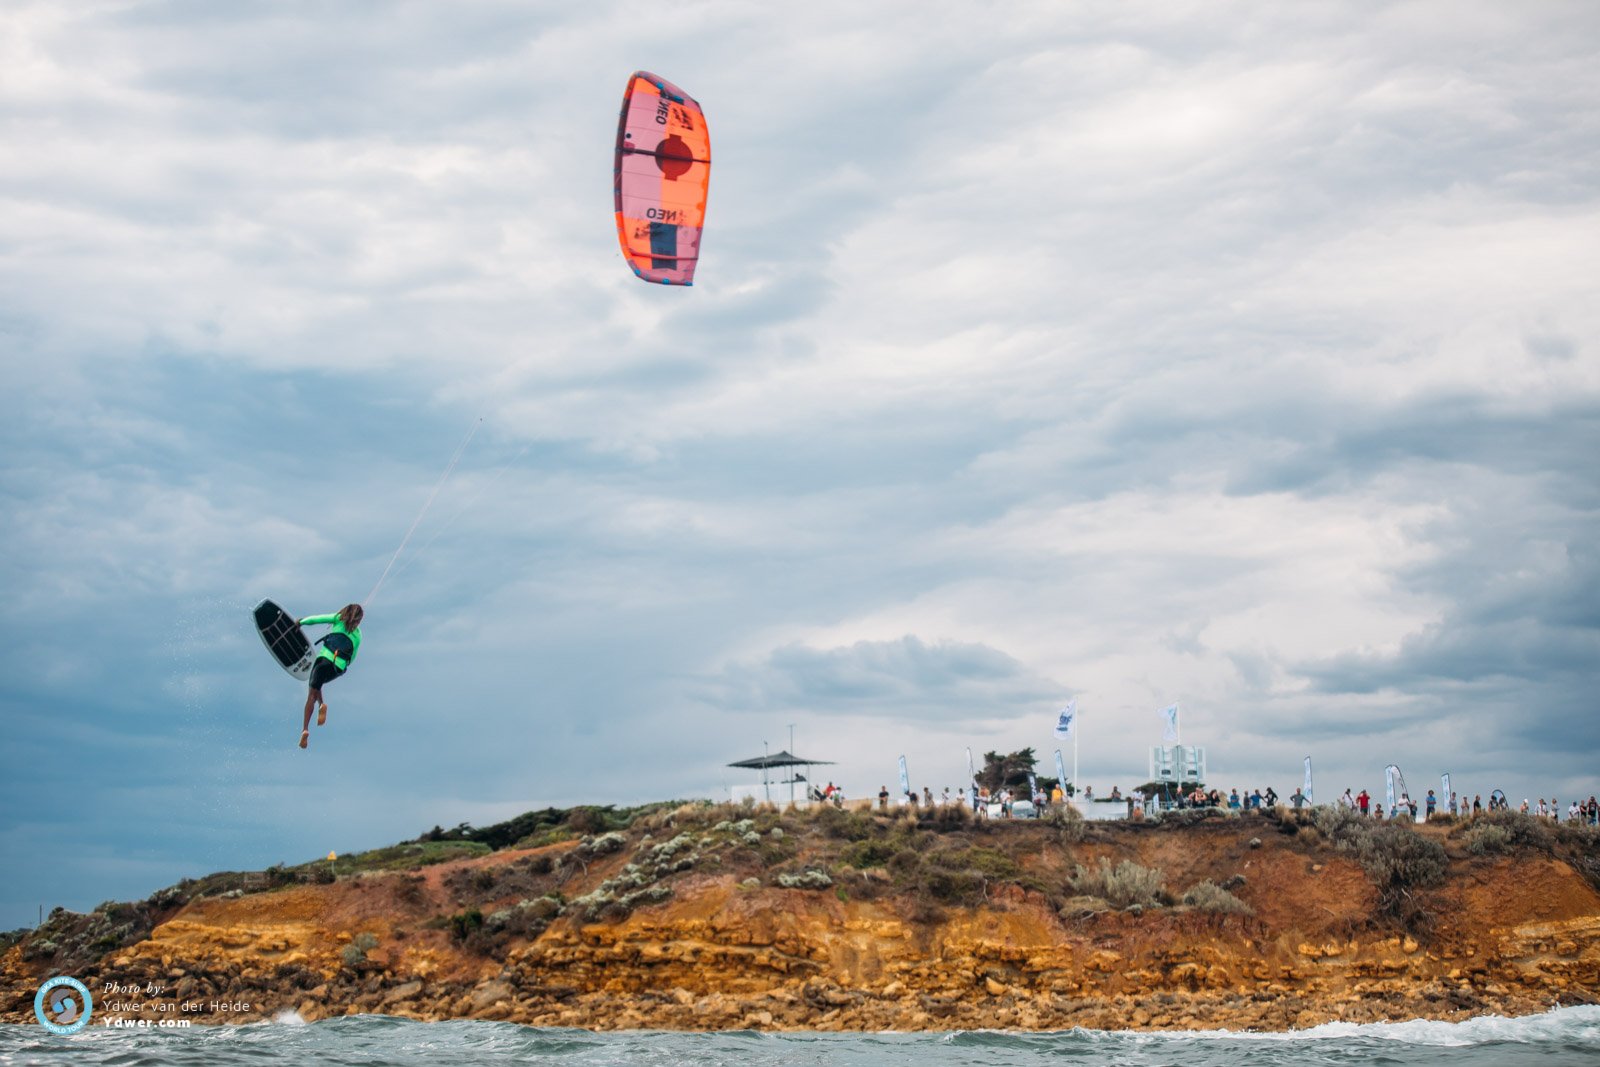  XXX performs at the GKA Kite Surf World Tour in Portugal on June 7, 2018 